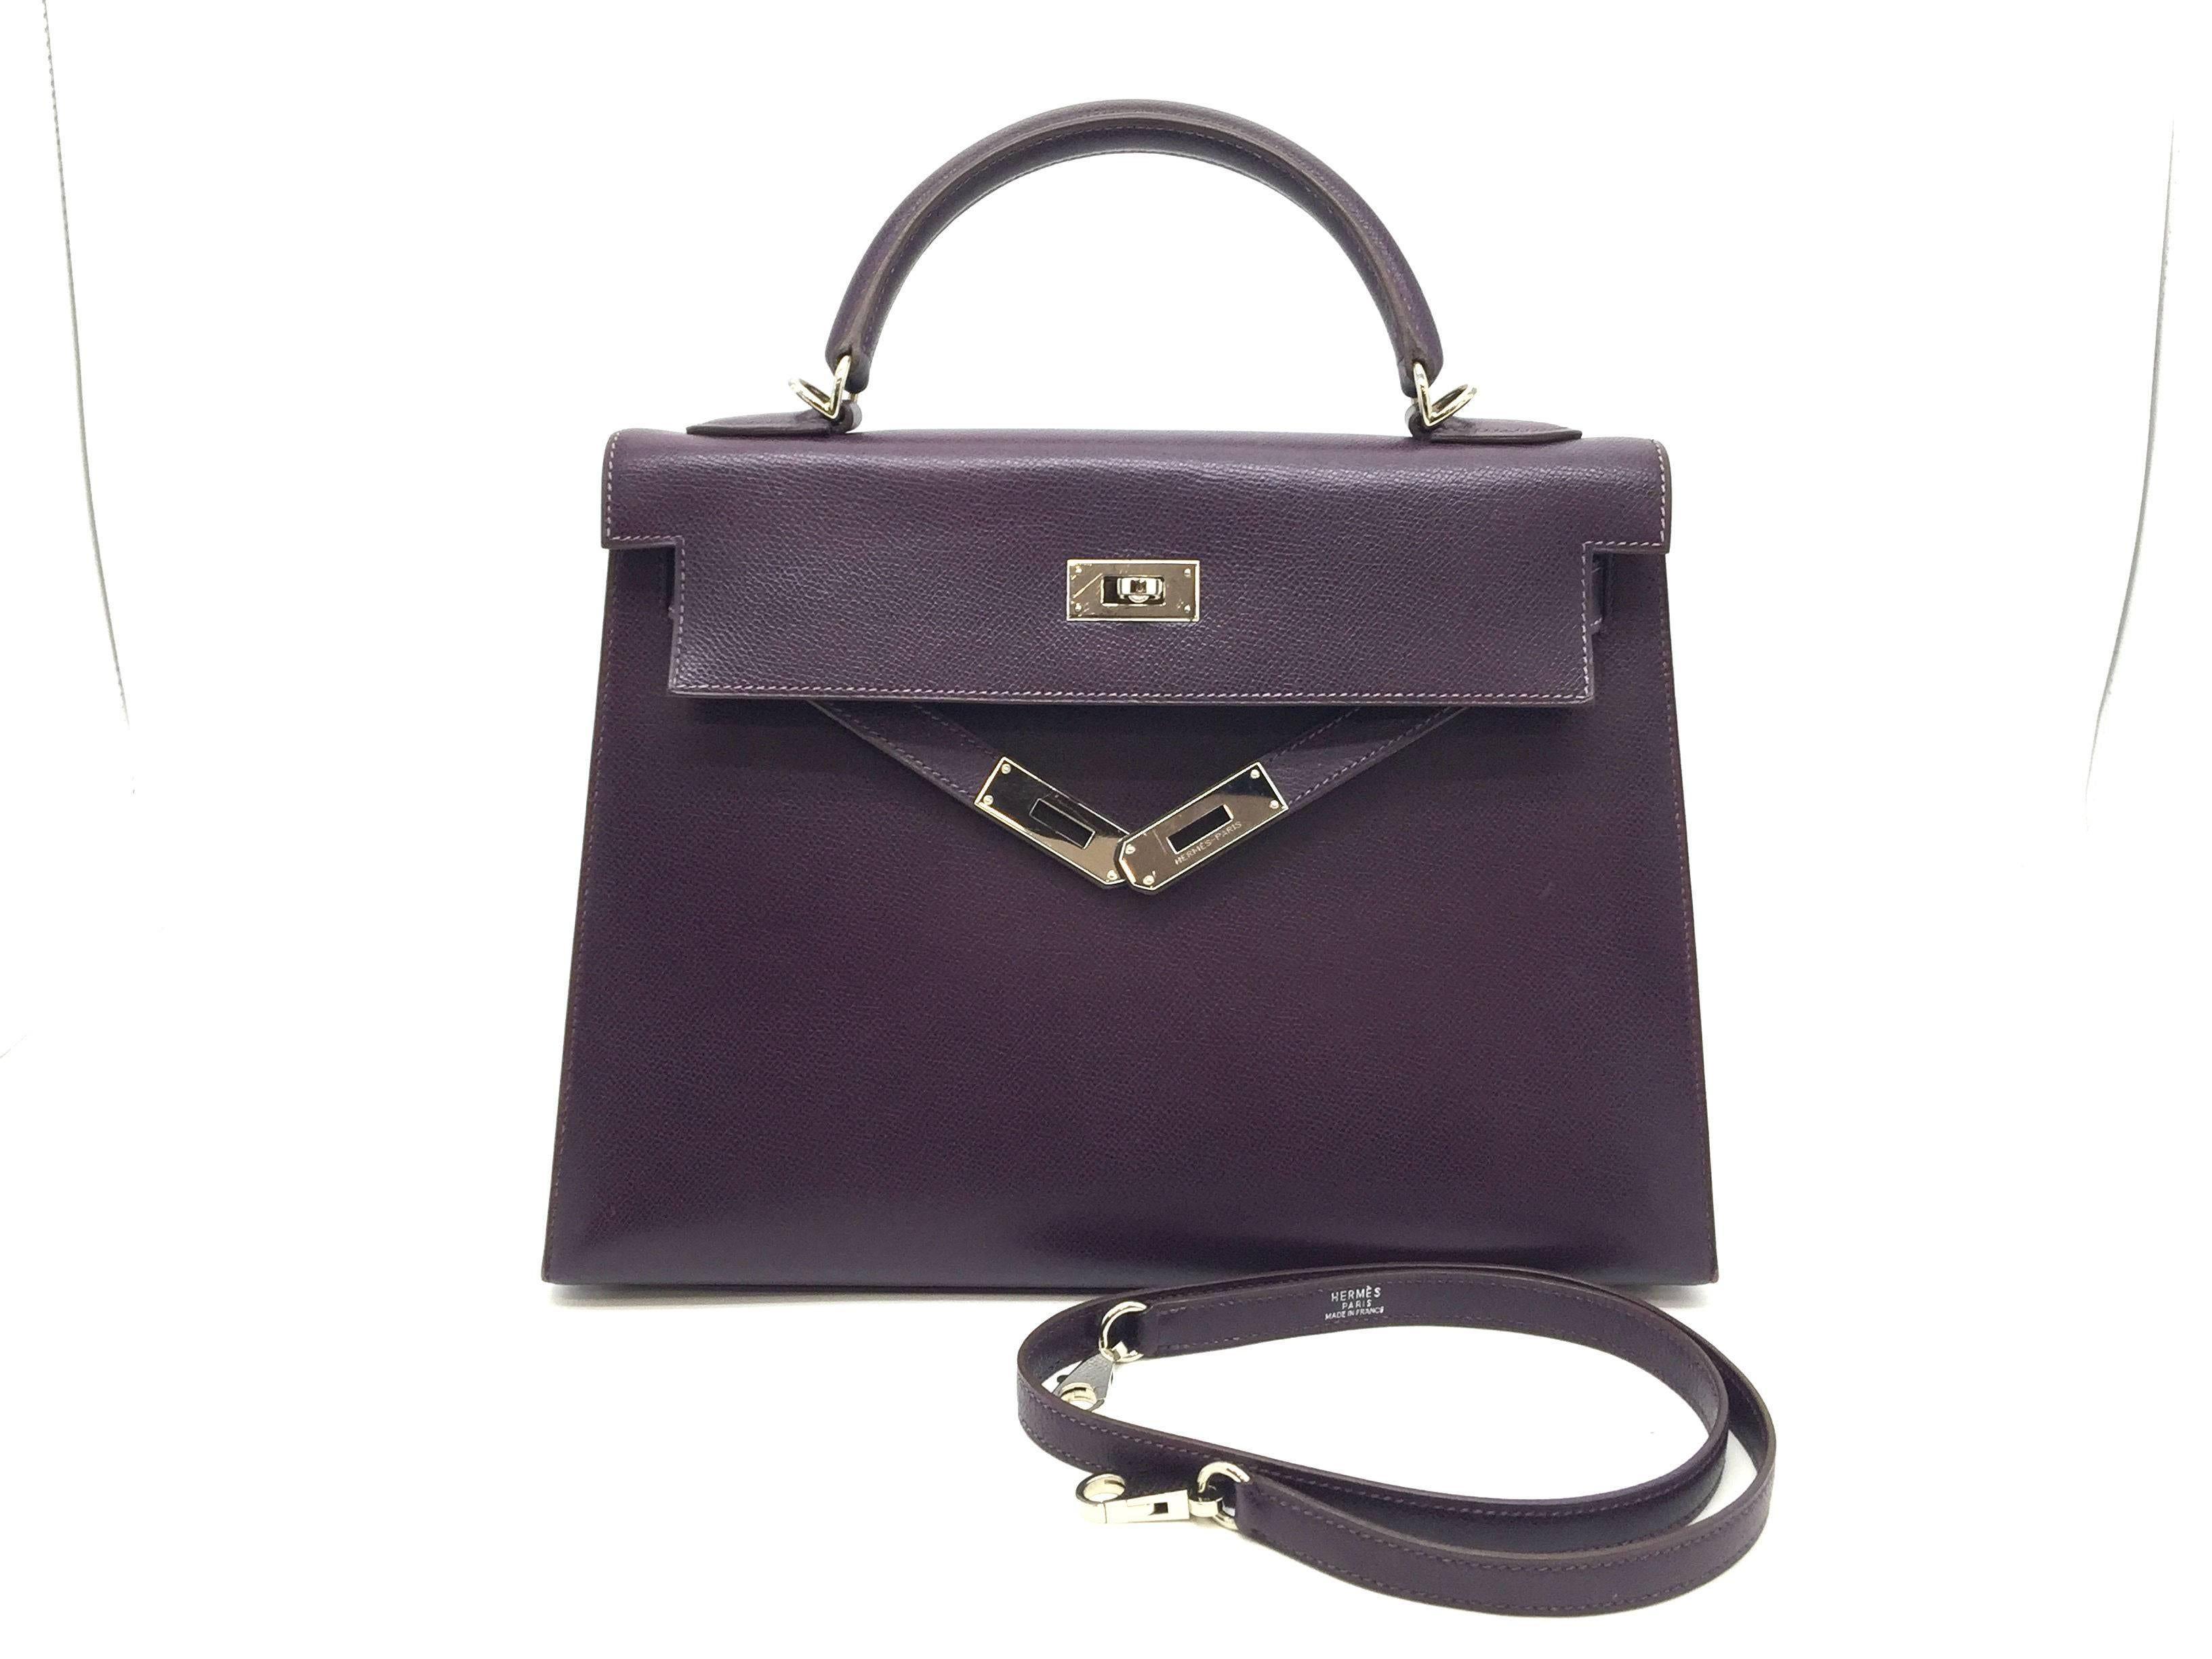 Color: Purple / Raisin (designer color)
Material: Courchevel Leather

Condition:
Rank A
Overall: Good, minor defects
Surface:Minor Scratches
Corners:Minor Scratches
Edges:Minor Scratches
Handles/Straps:Minor Scratches
Hardware:Minor